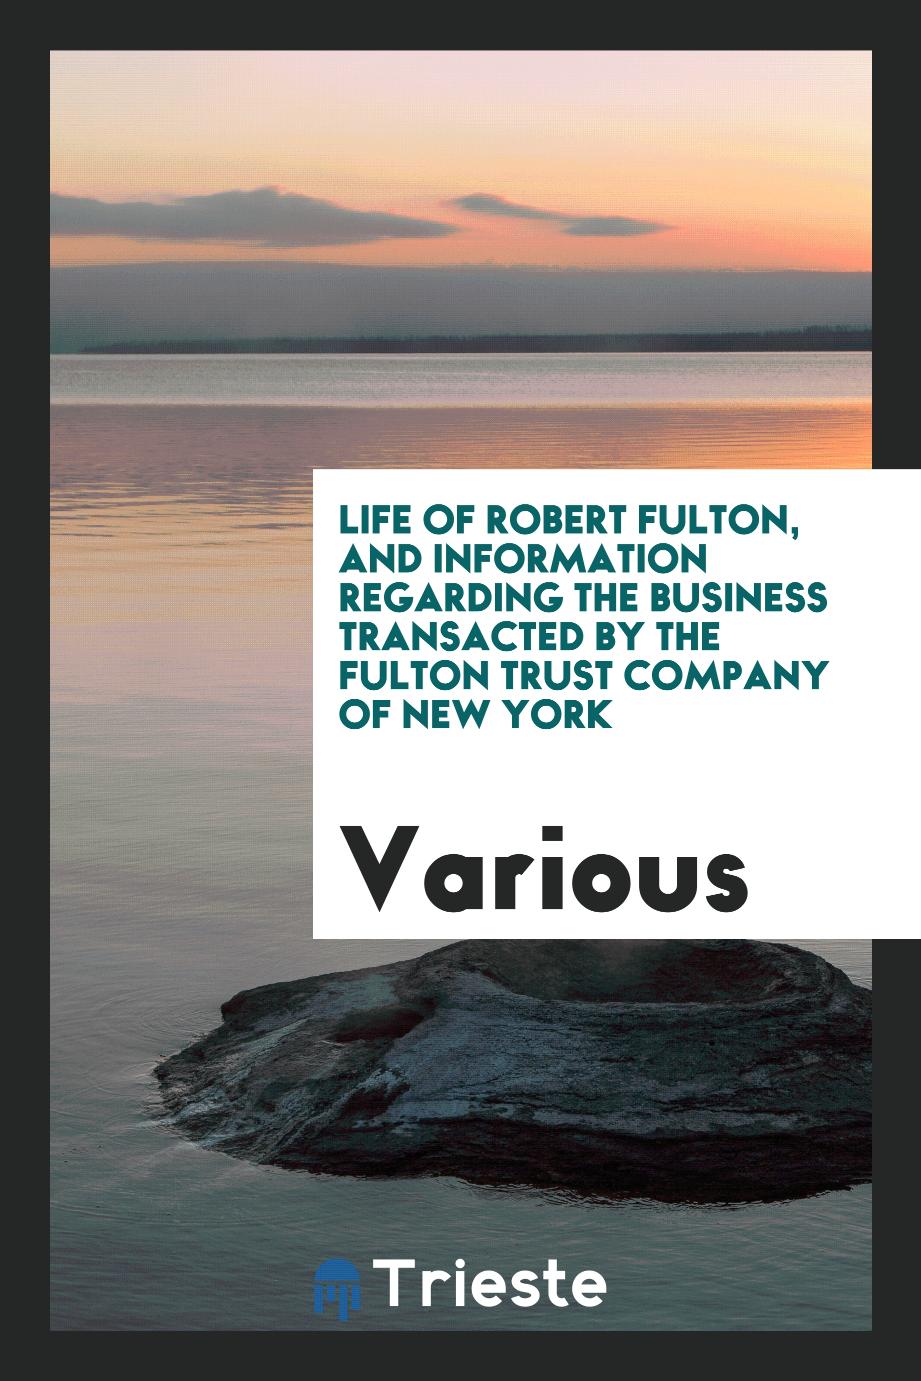 Life of Robert Fulton, and Information Regarding the Business Transacted by the Fulton Trust Company of New York